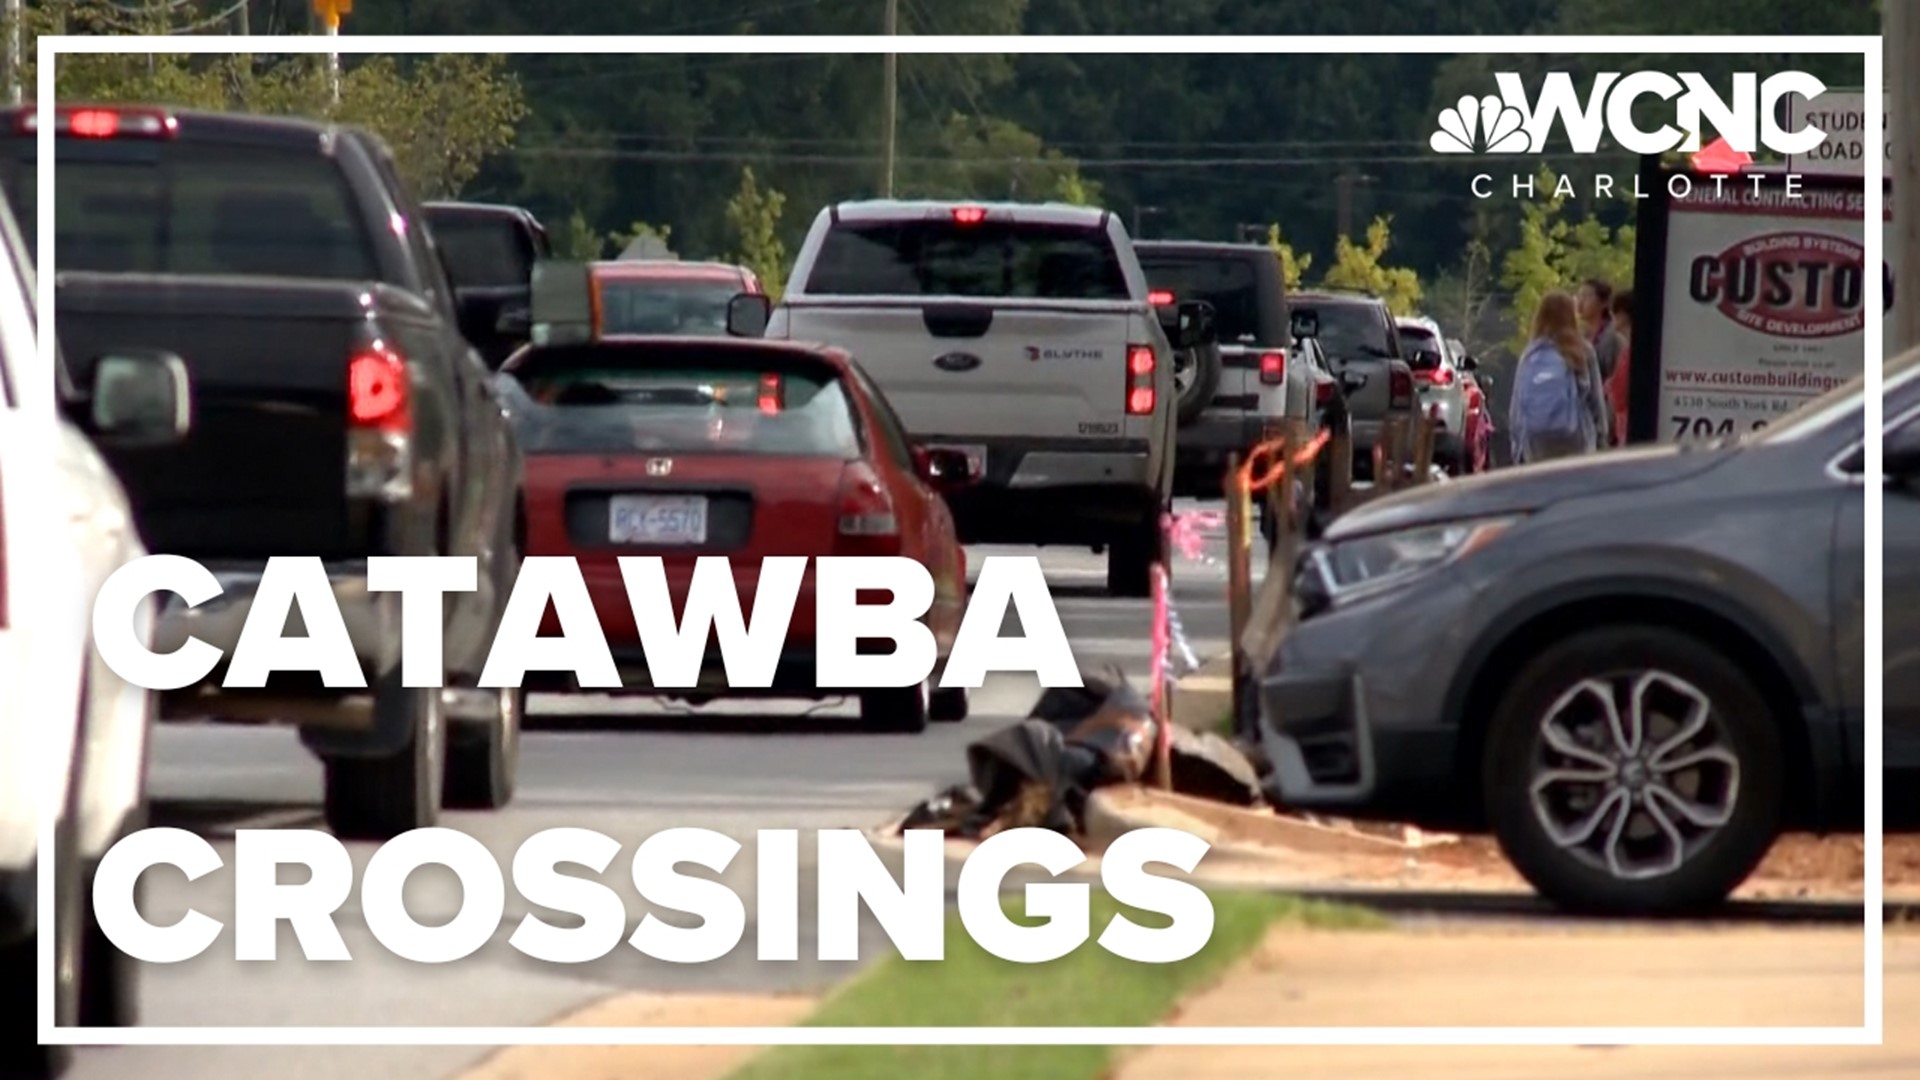 We're learning new developments about a proposed road that would span the Catawba River to connect Gaston and Mecklenburg Counties.